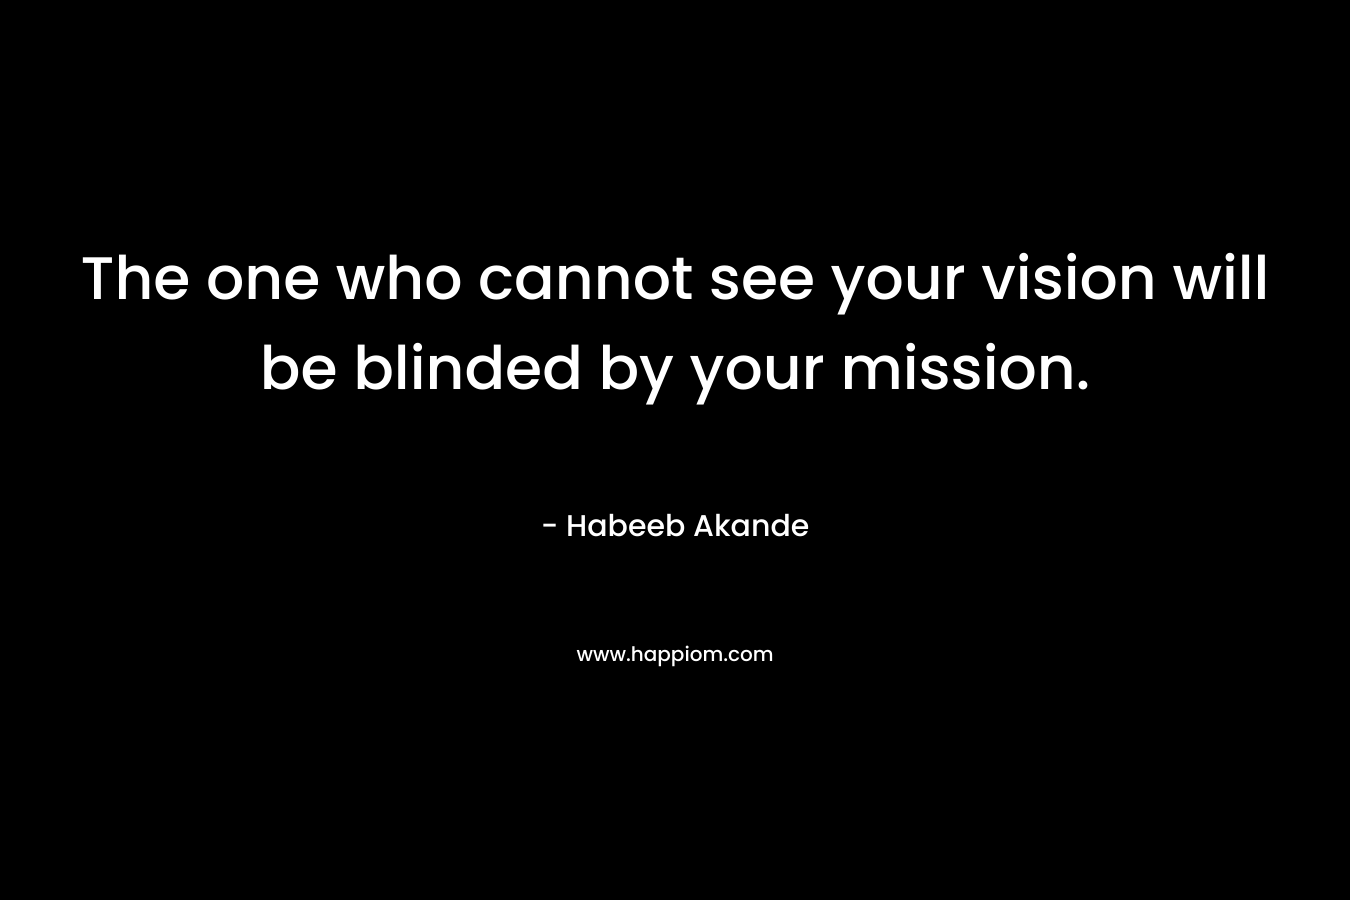 The one who cannot see your vision will be blinded by your mission. – Habeeb Akande